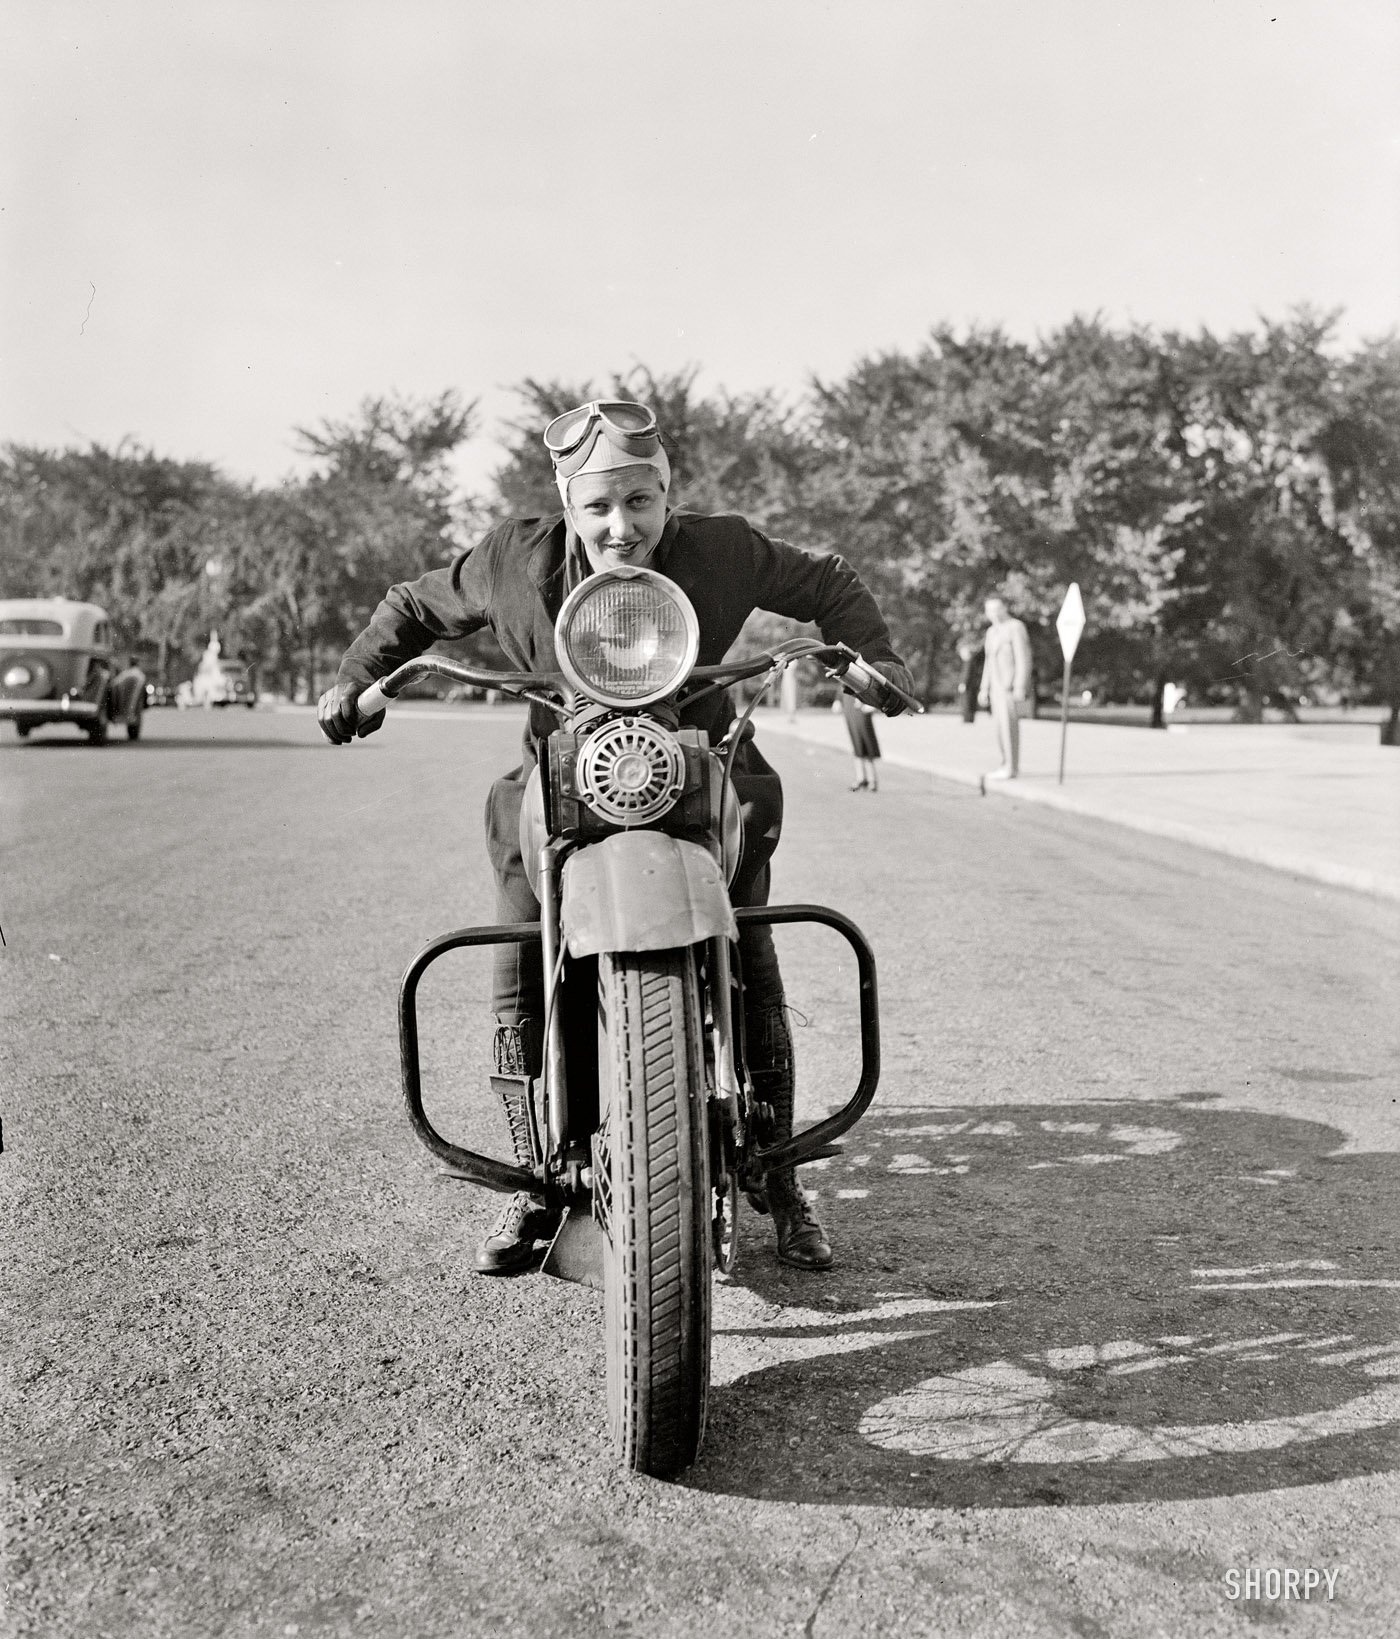 September 15, 1937. "First of fair sex to obtain motorcycle license in Capital. Although she weighs only 88 pounds -- one-third of the machine she rides, Mrs. Sally Halterman is the first woman to be granted a license to operate a motorcycle in the District of Columbia. She is 27 years old and 4 feet, 11 inches tall. Immediately after receiving her permit, Mrs. Halterman was initiated into the D.C. Motorcycle Club -- the only girl ever to be accorded this honor." View full size.